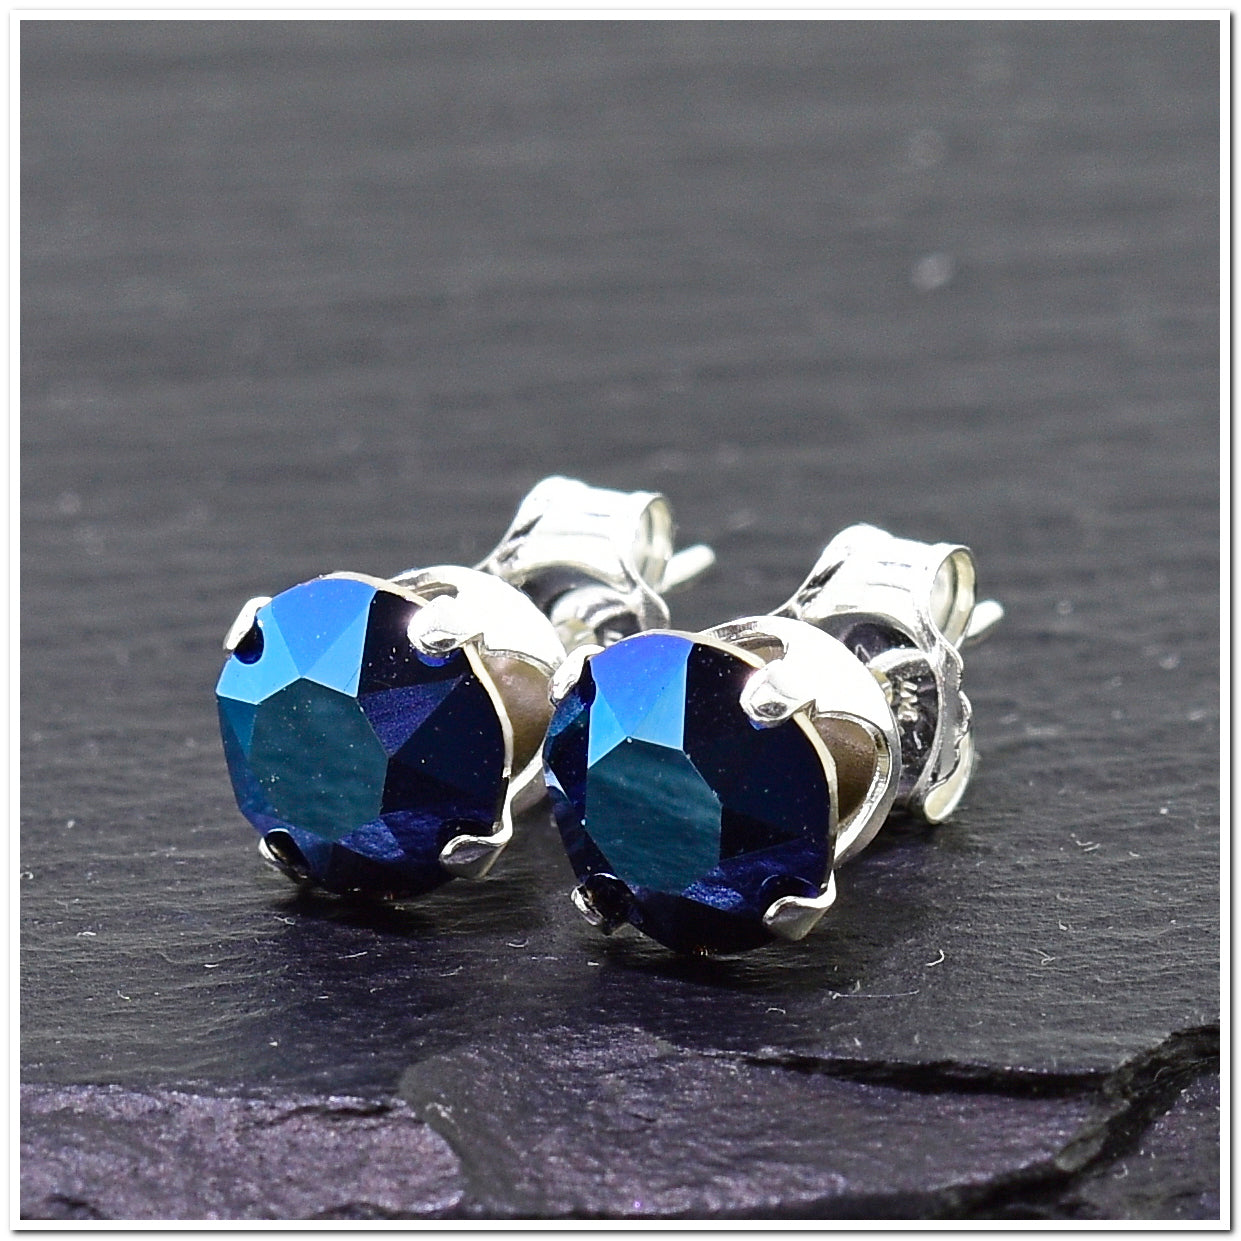 pewterhooter® Women's Classic Collection 925 Sterling silver earrings with sparkling Metallic Blue crystals, packaged in a gift box for any occasion.